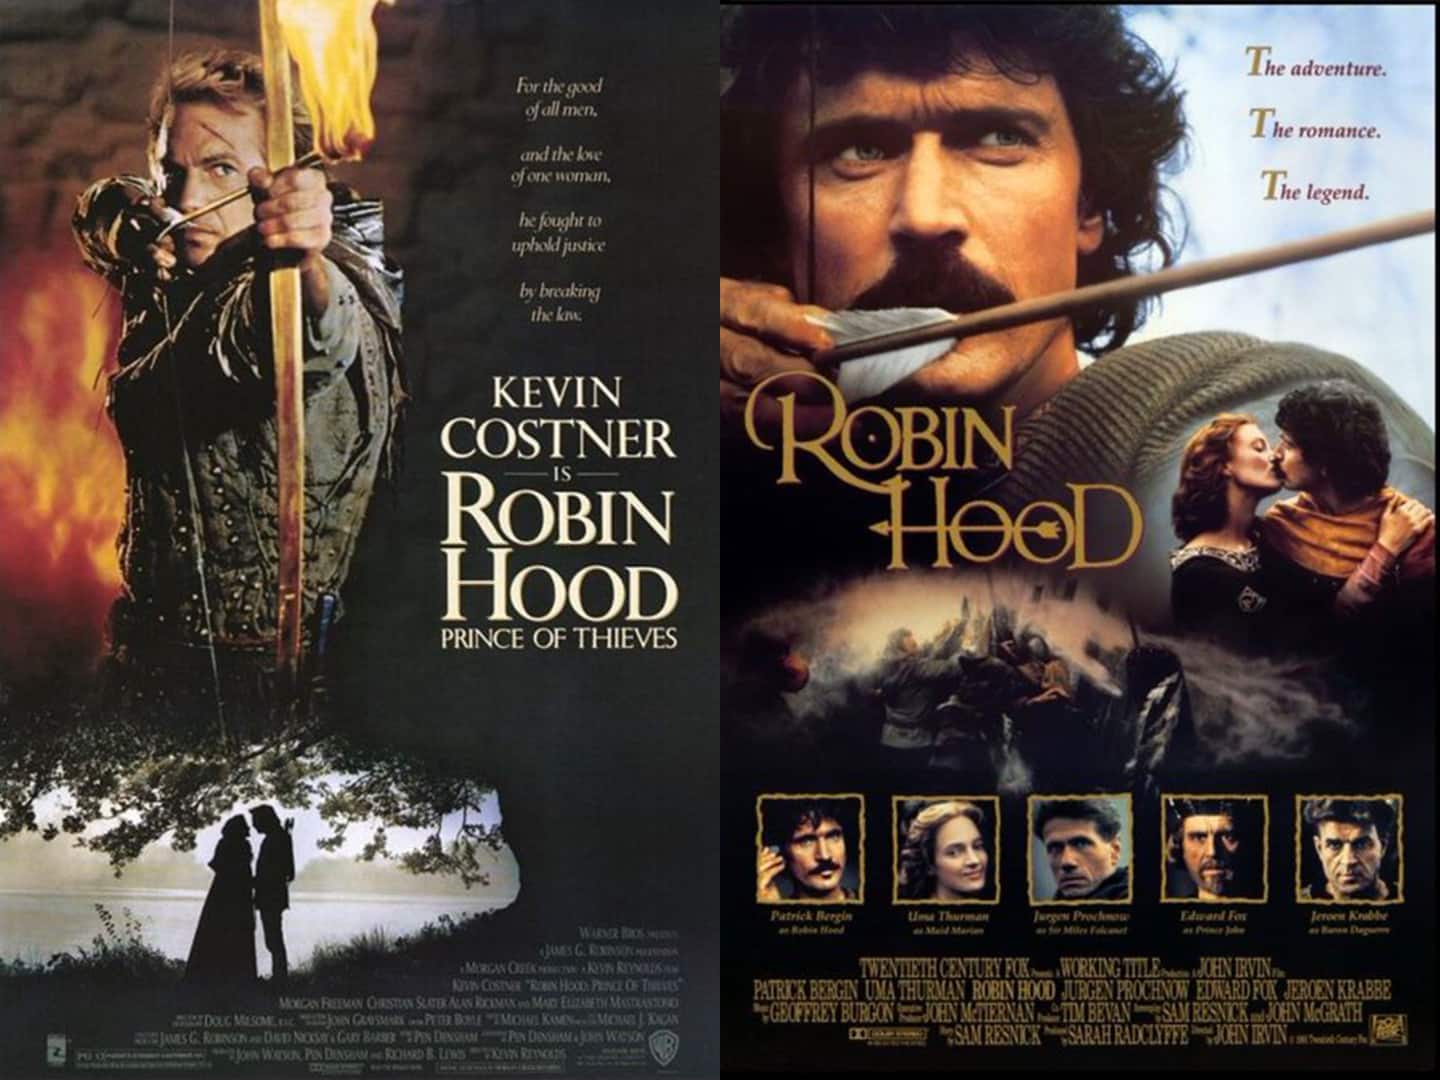 movie posters, movies, movie, films, same movie same year, repeats, hollywood, twitter thread, twitter